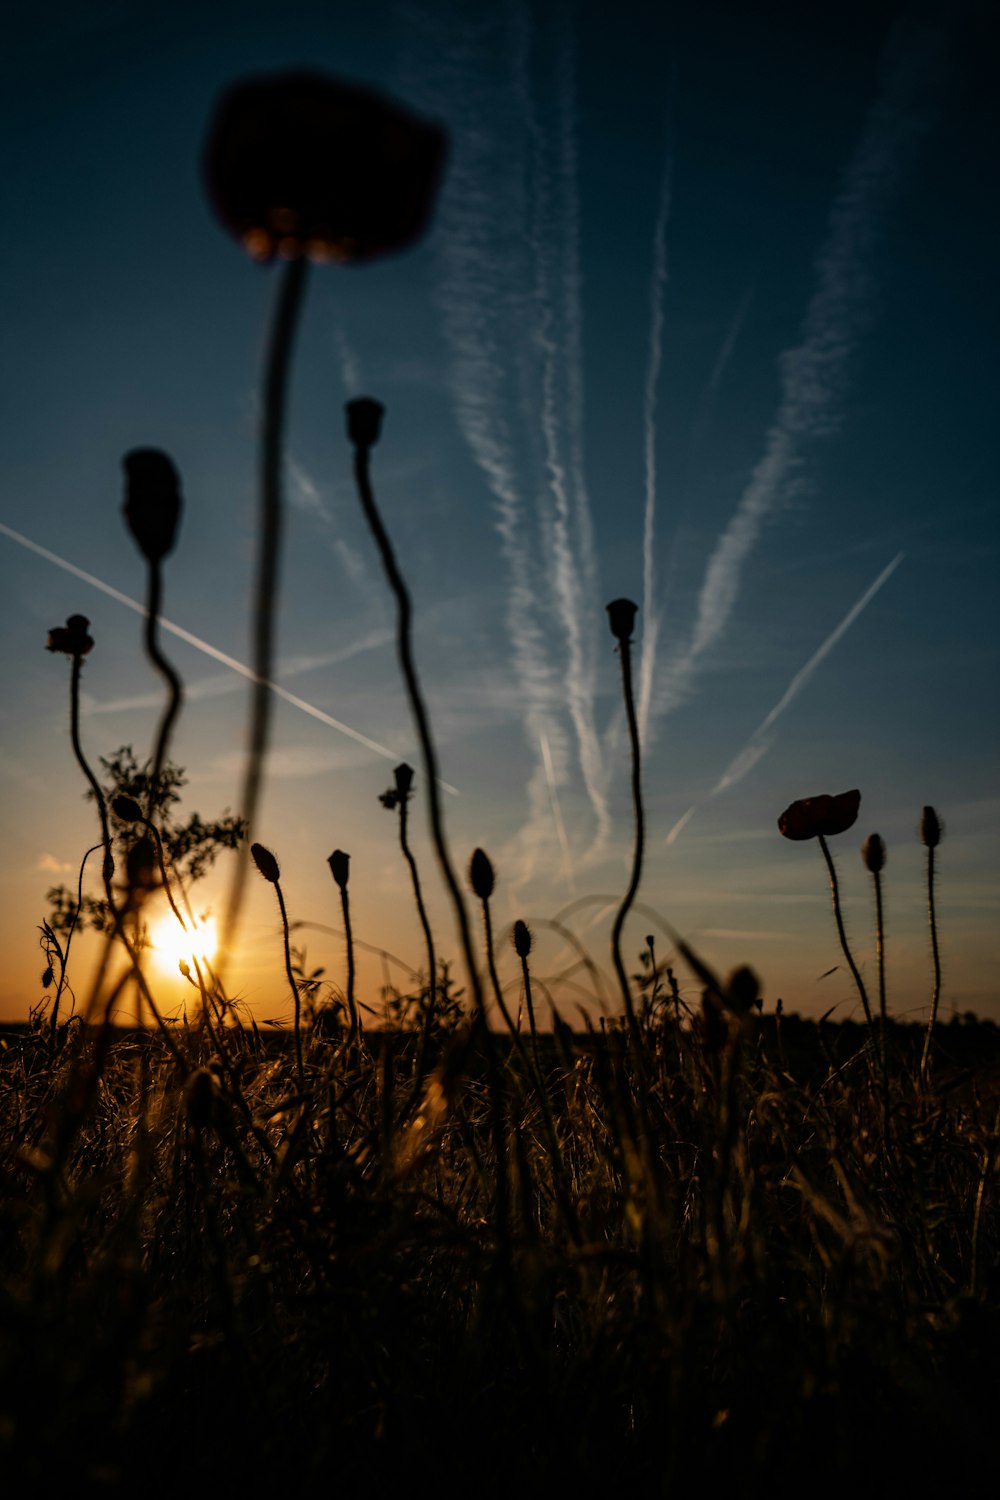 a group of dandelions in a field with the sun shining through the clouds